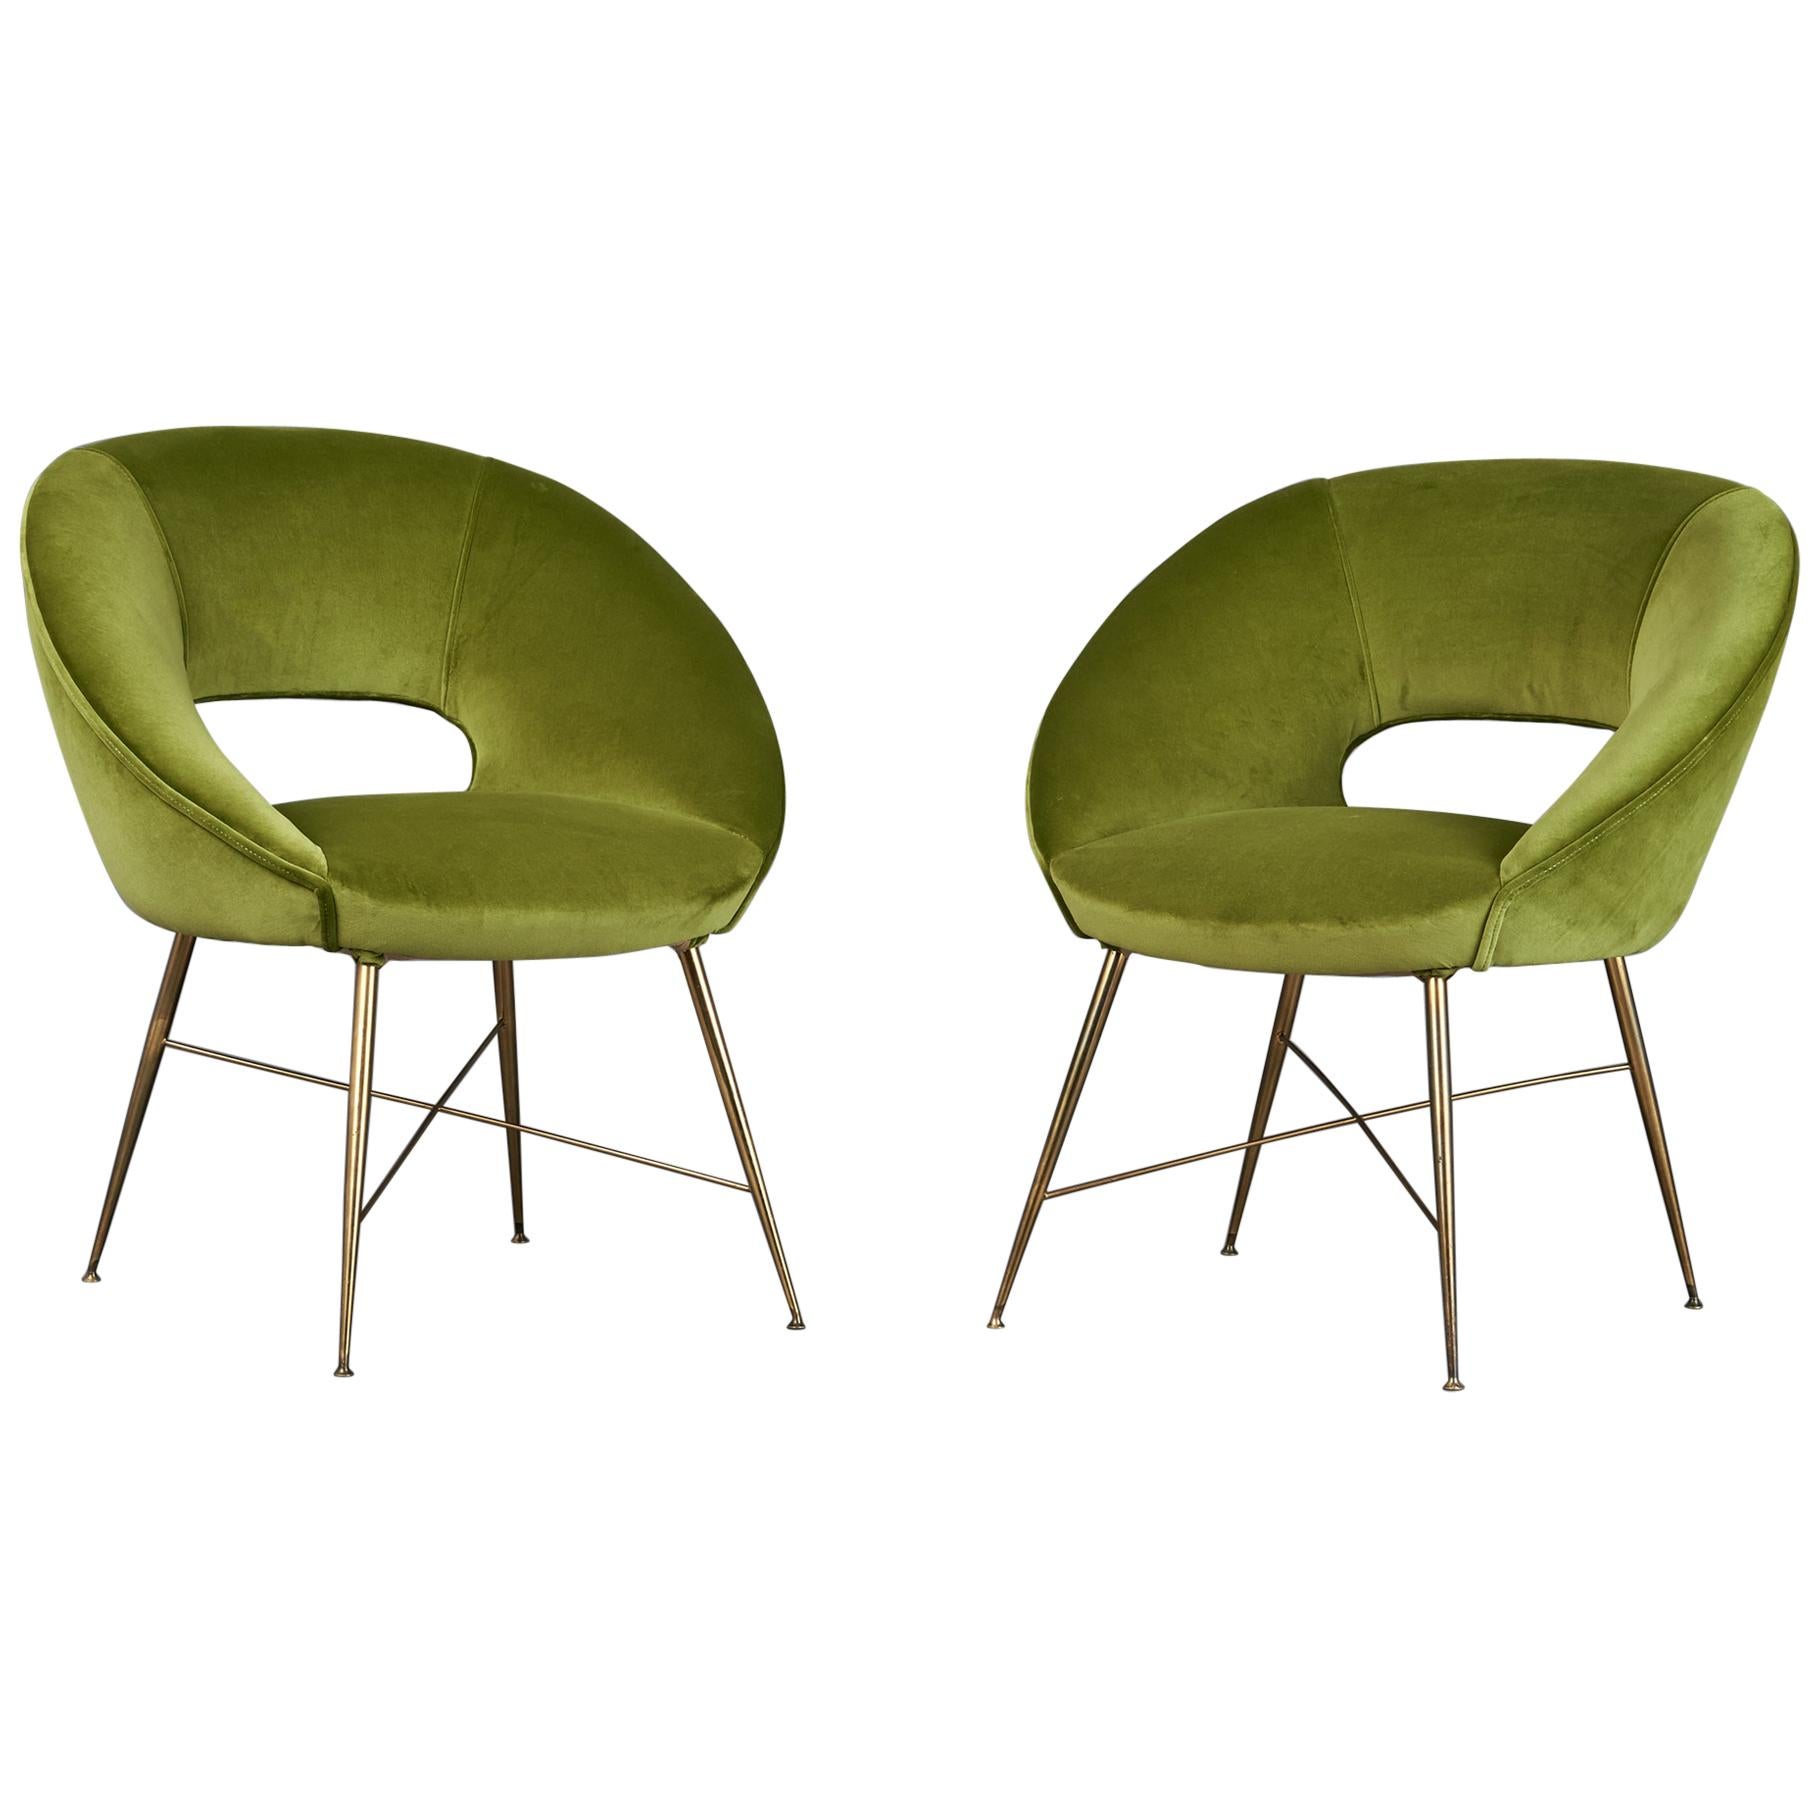 Pair of Egg Shaped Modernist Italian Armchairs, 1950s